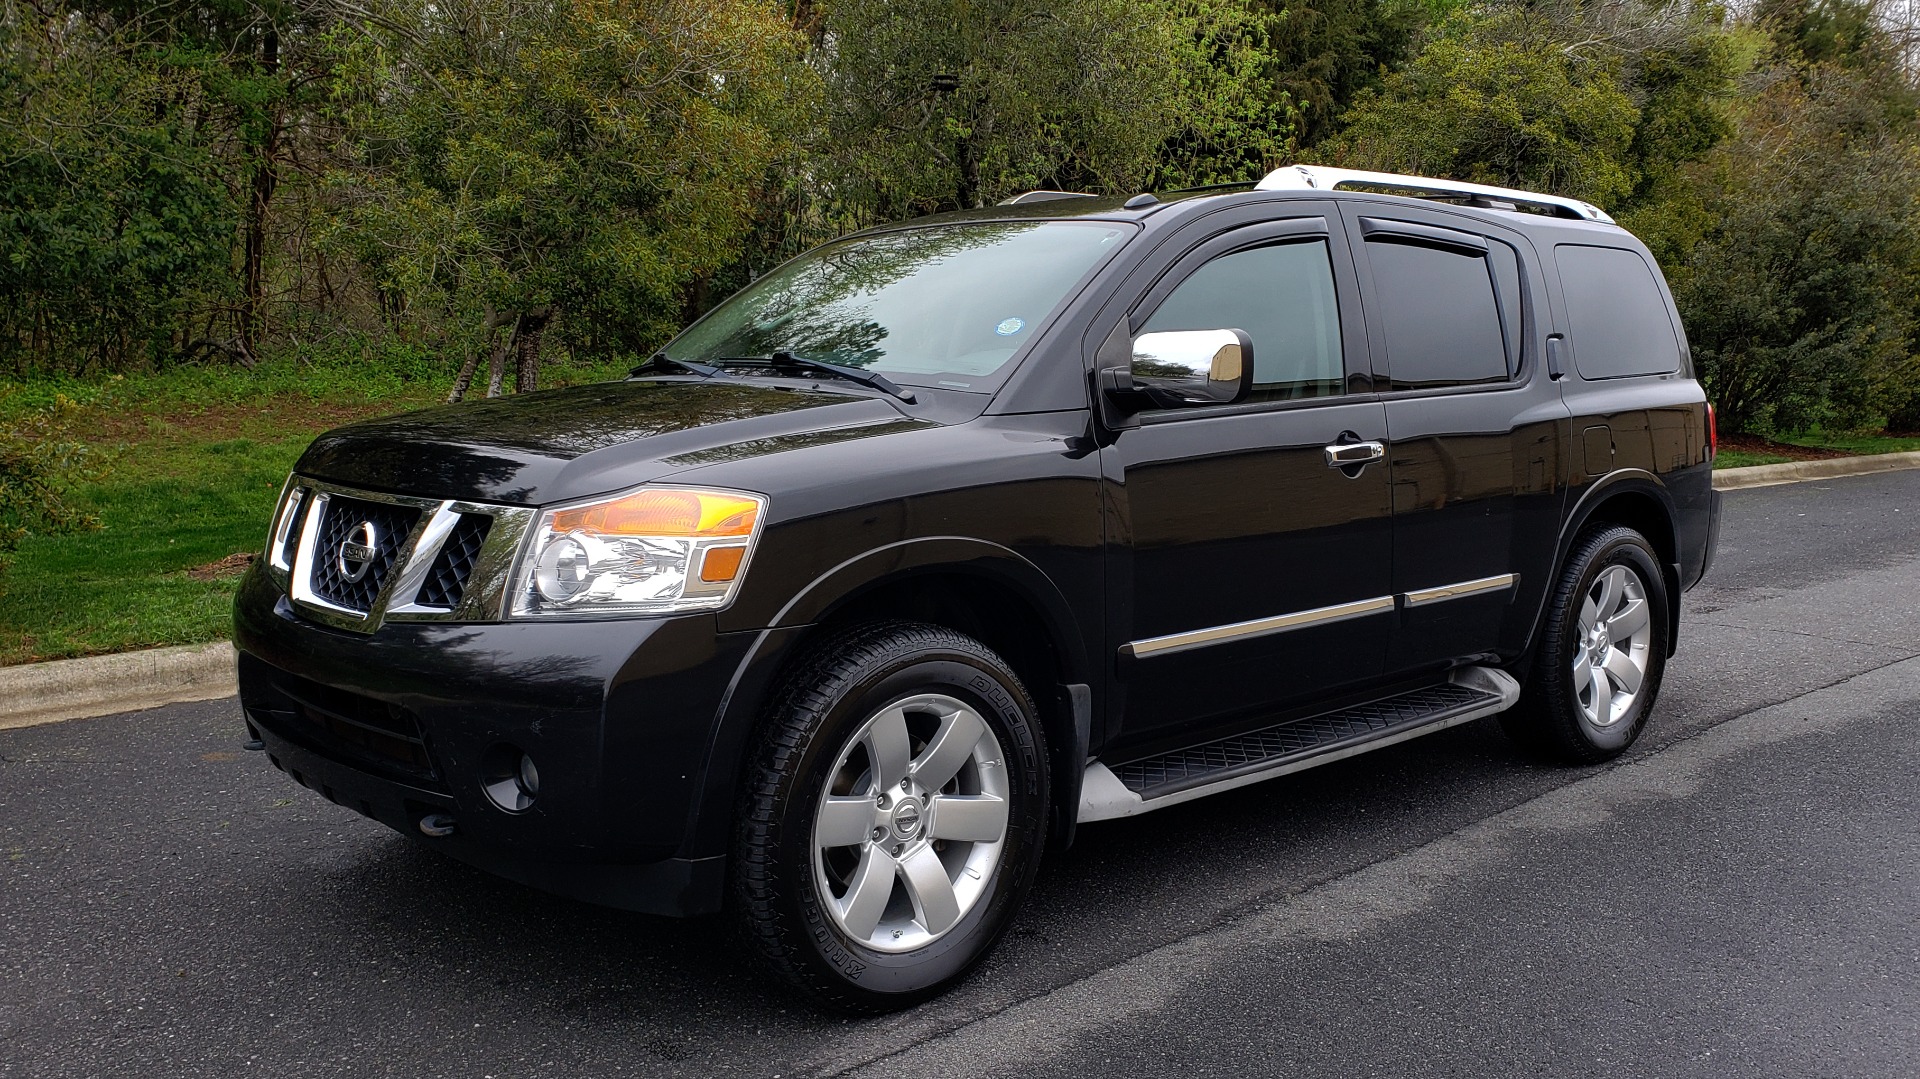 Used 2013 Nissan ARMADA SL 4WD / 5.6L V8 / NAV / SUNROOF / 3-ROW / REARVIEW for sale Sold at Formula Imports in Charlotte NC 28227 1